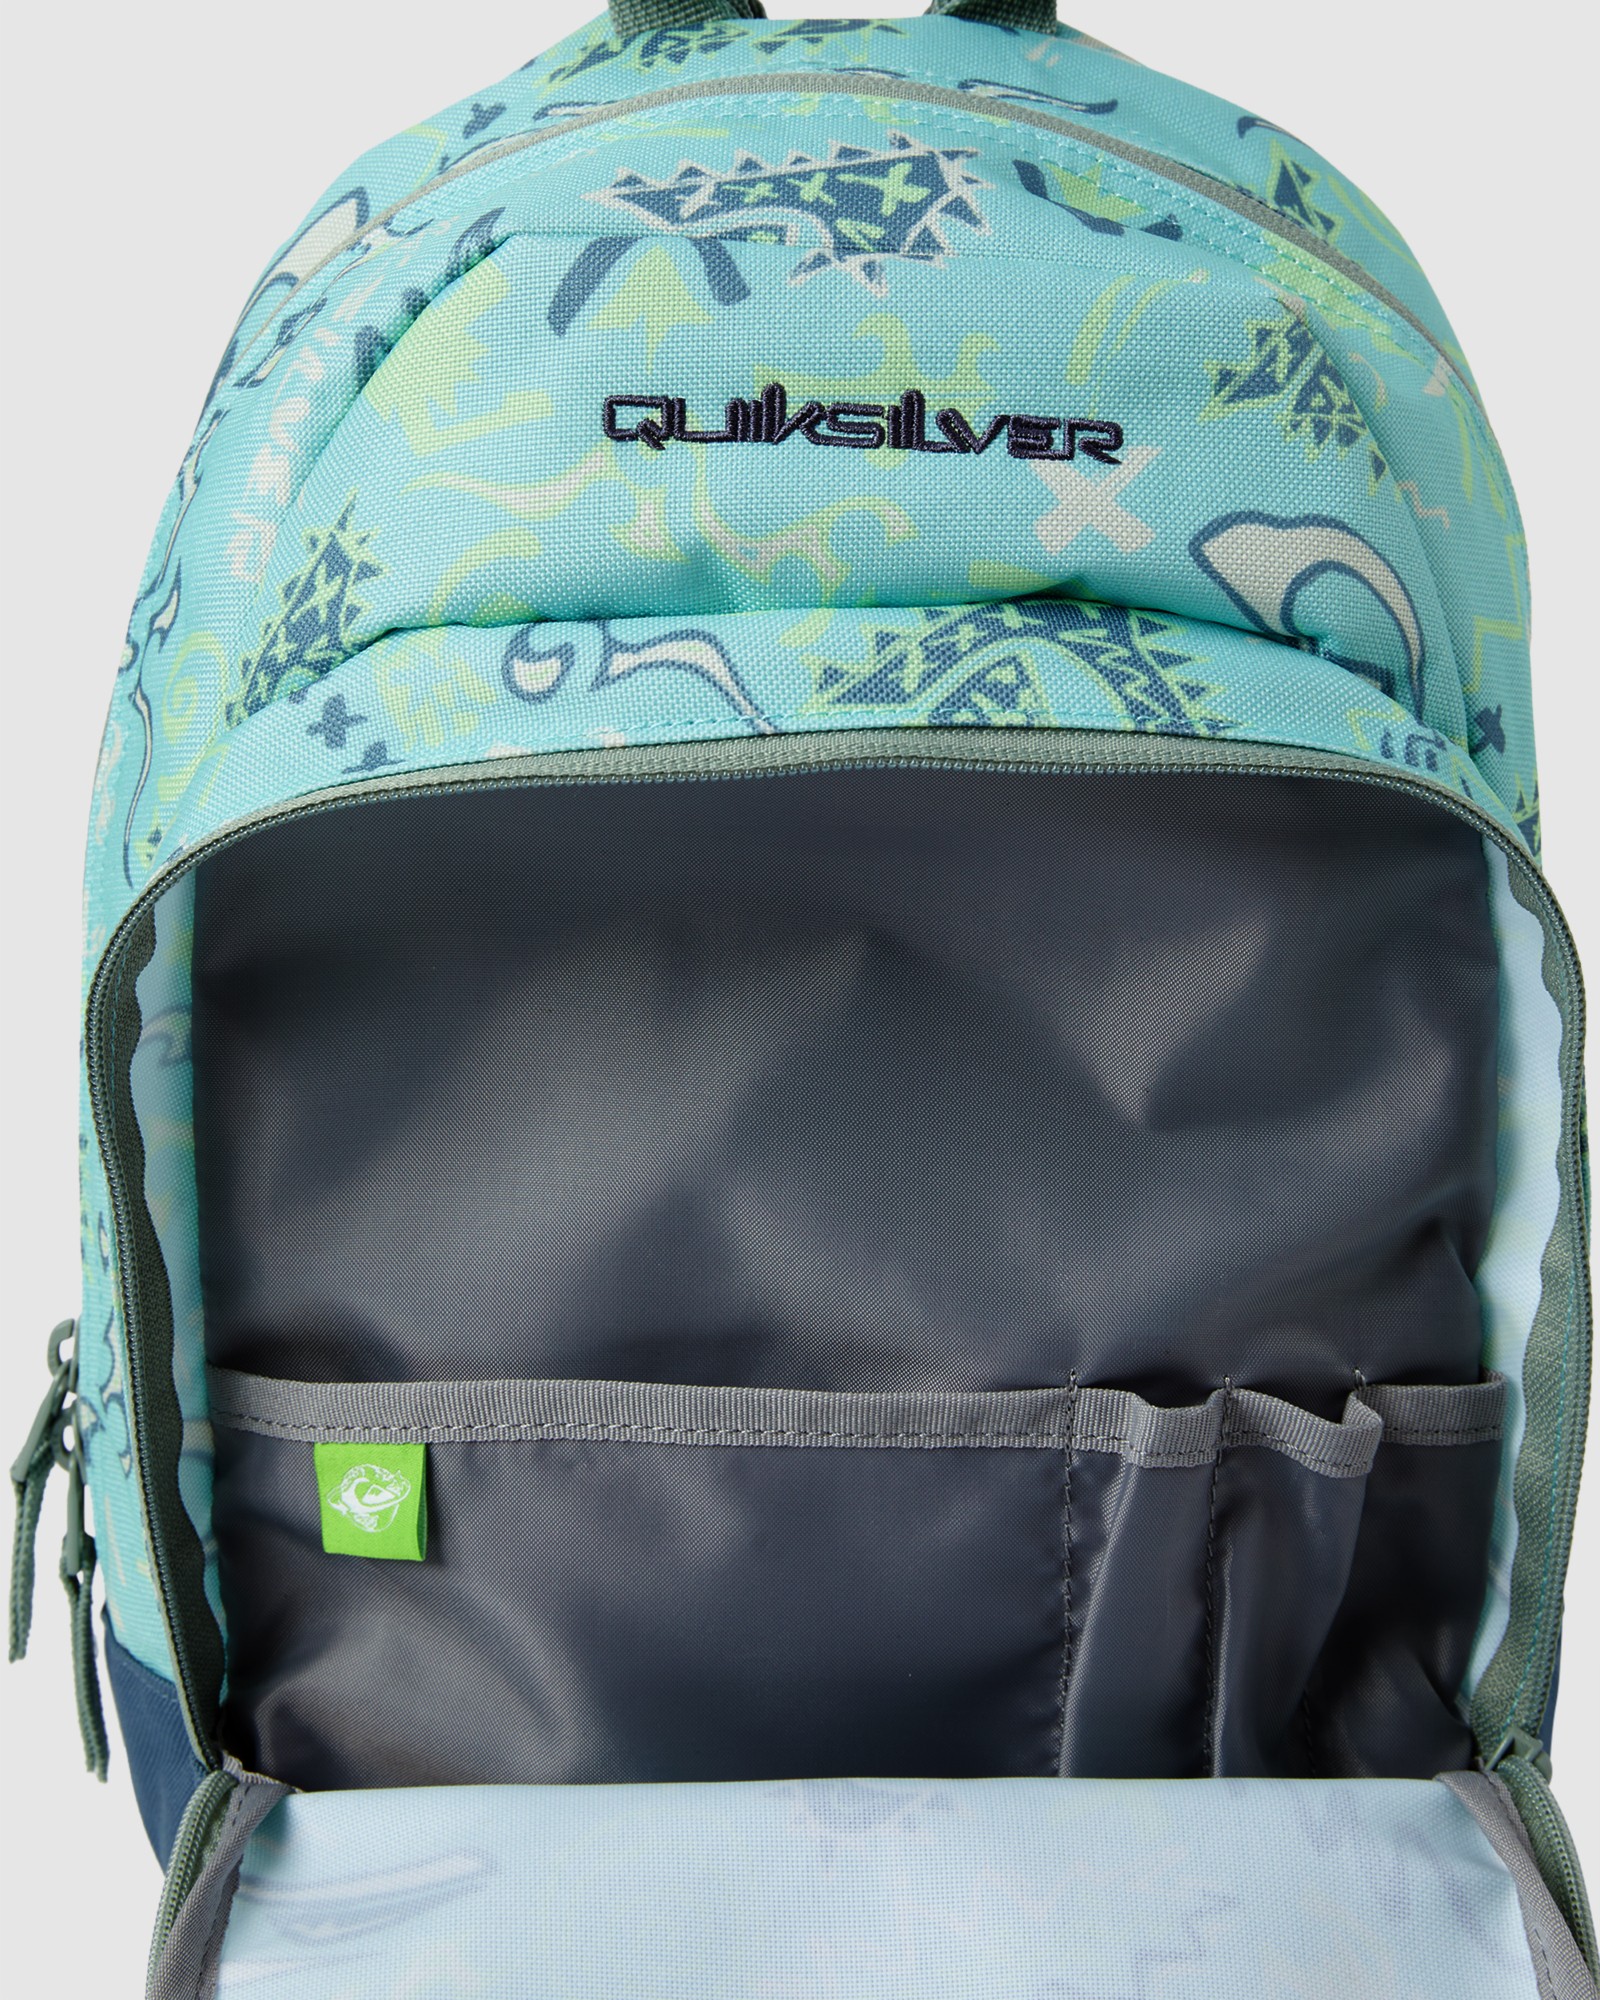 12L Pastel Turquoise - | SurfStitch Chomping Small Backpack Quiksilver